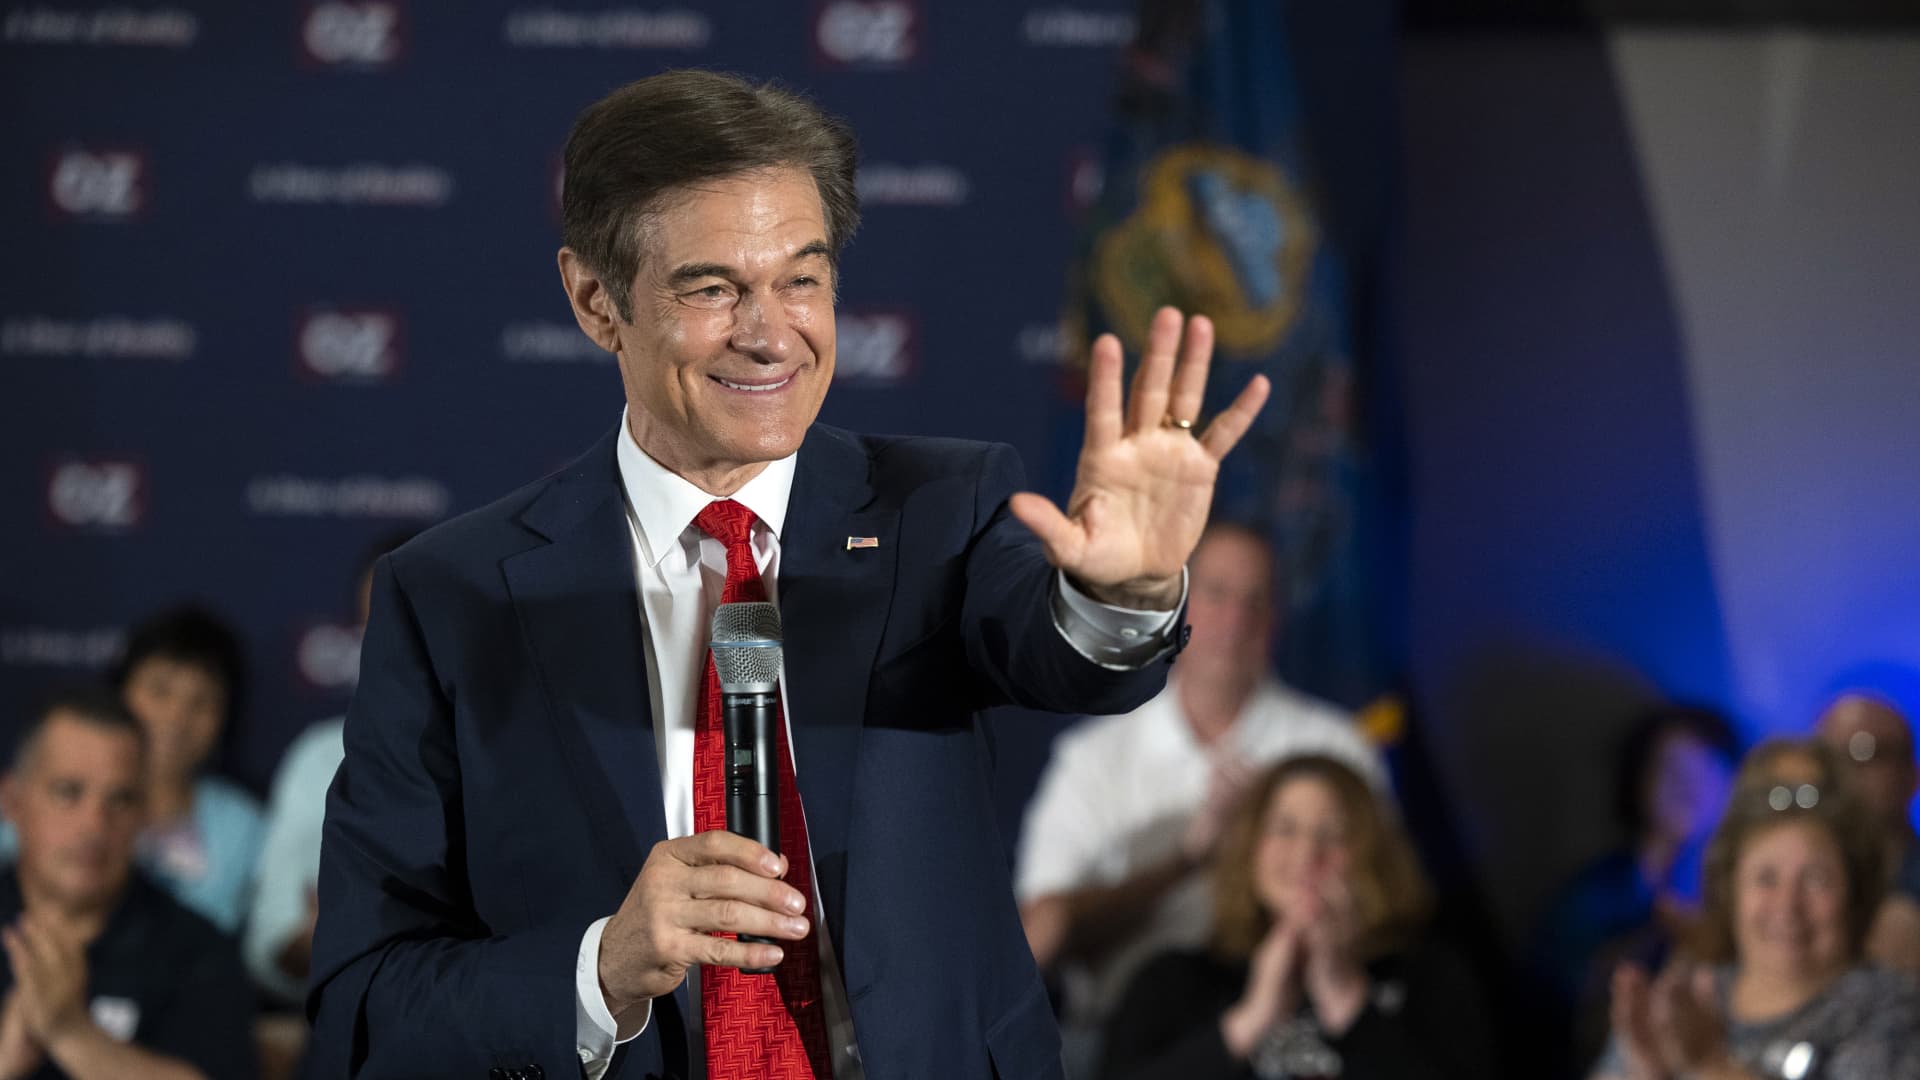 Polls close in Pennsylvania Senate Republican primary clash among Oz, McCormick and Barnette - CNBC : Voters in Pennsylvania decided critical primary races, including a Republican Senate contest that featured Mehmet Oz, Dave McCormick and Kathy Barnette.  | Tranquility 國際社群